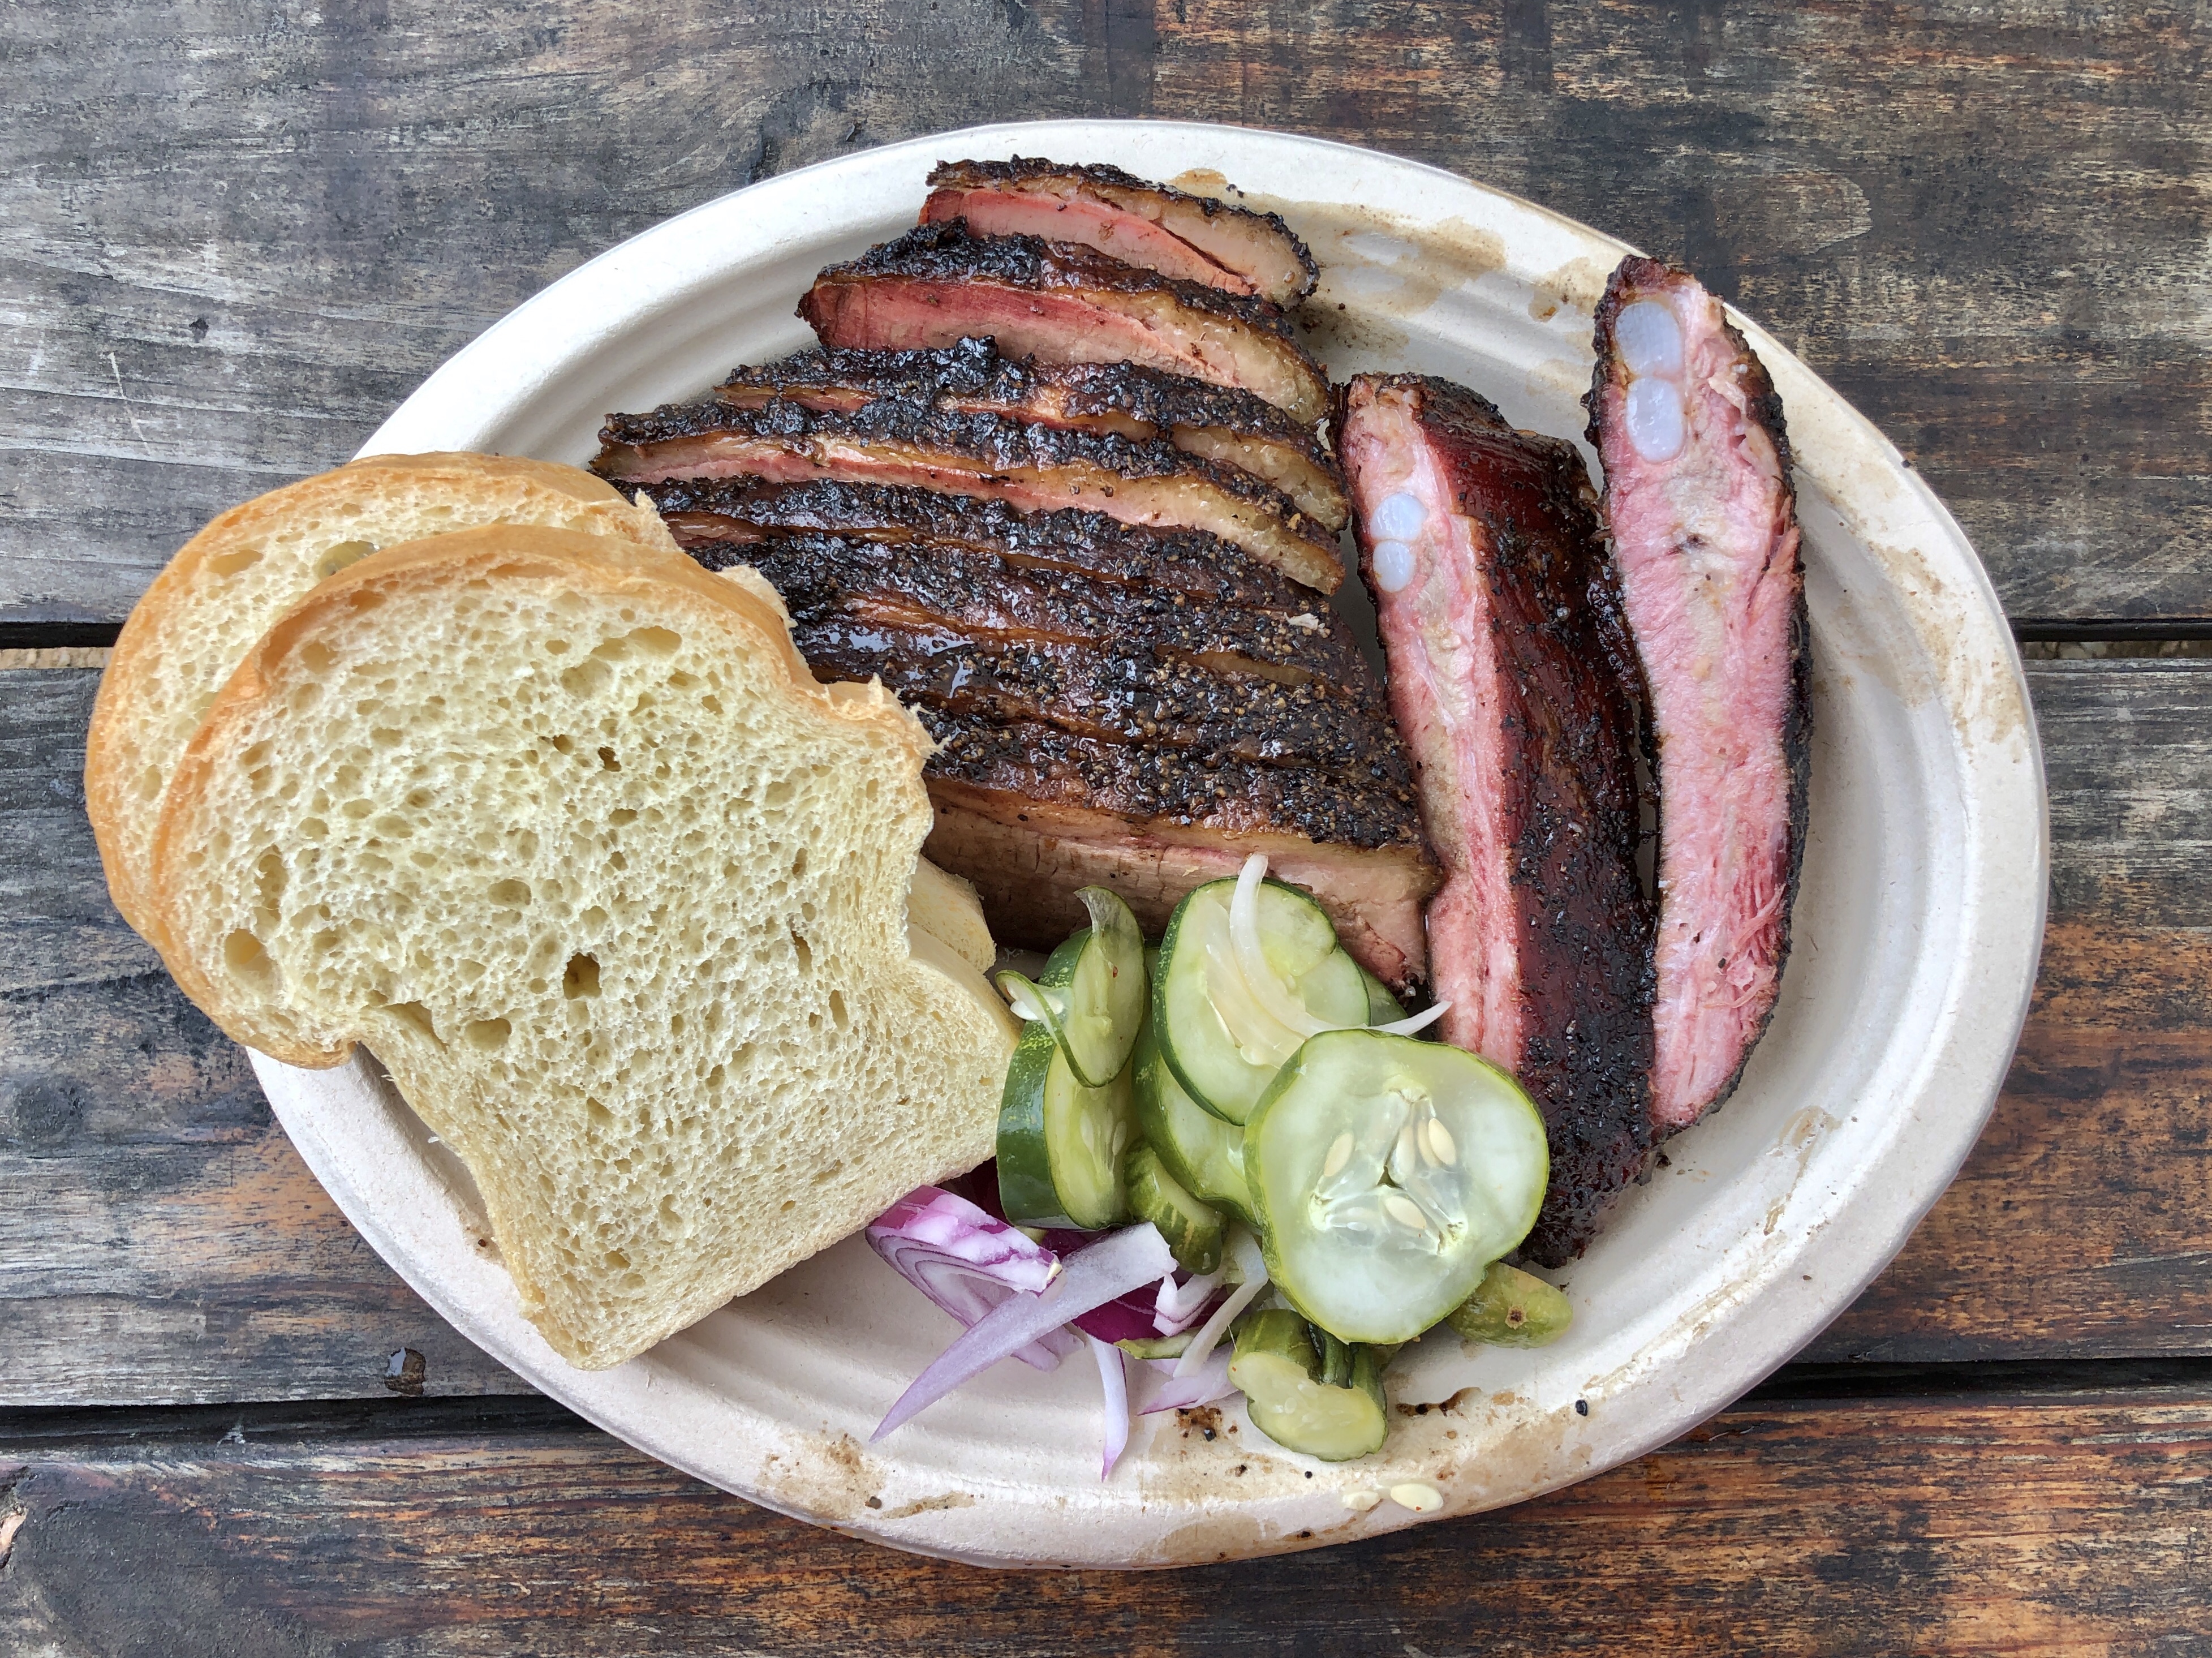 Micklethwait Craft Meats barbecue plate in Austin, Texas